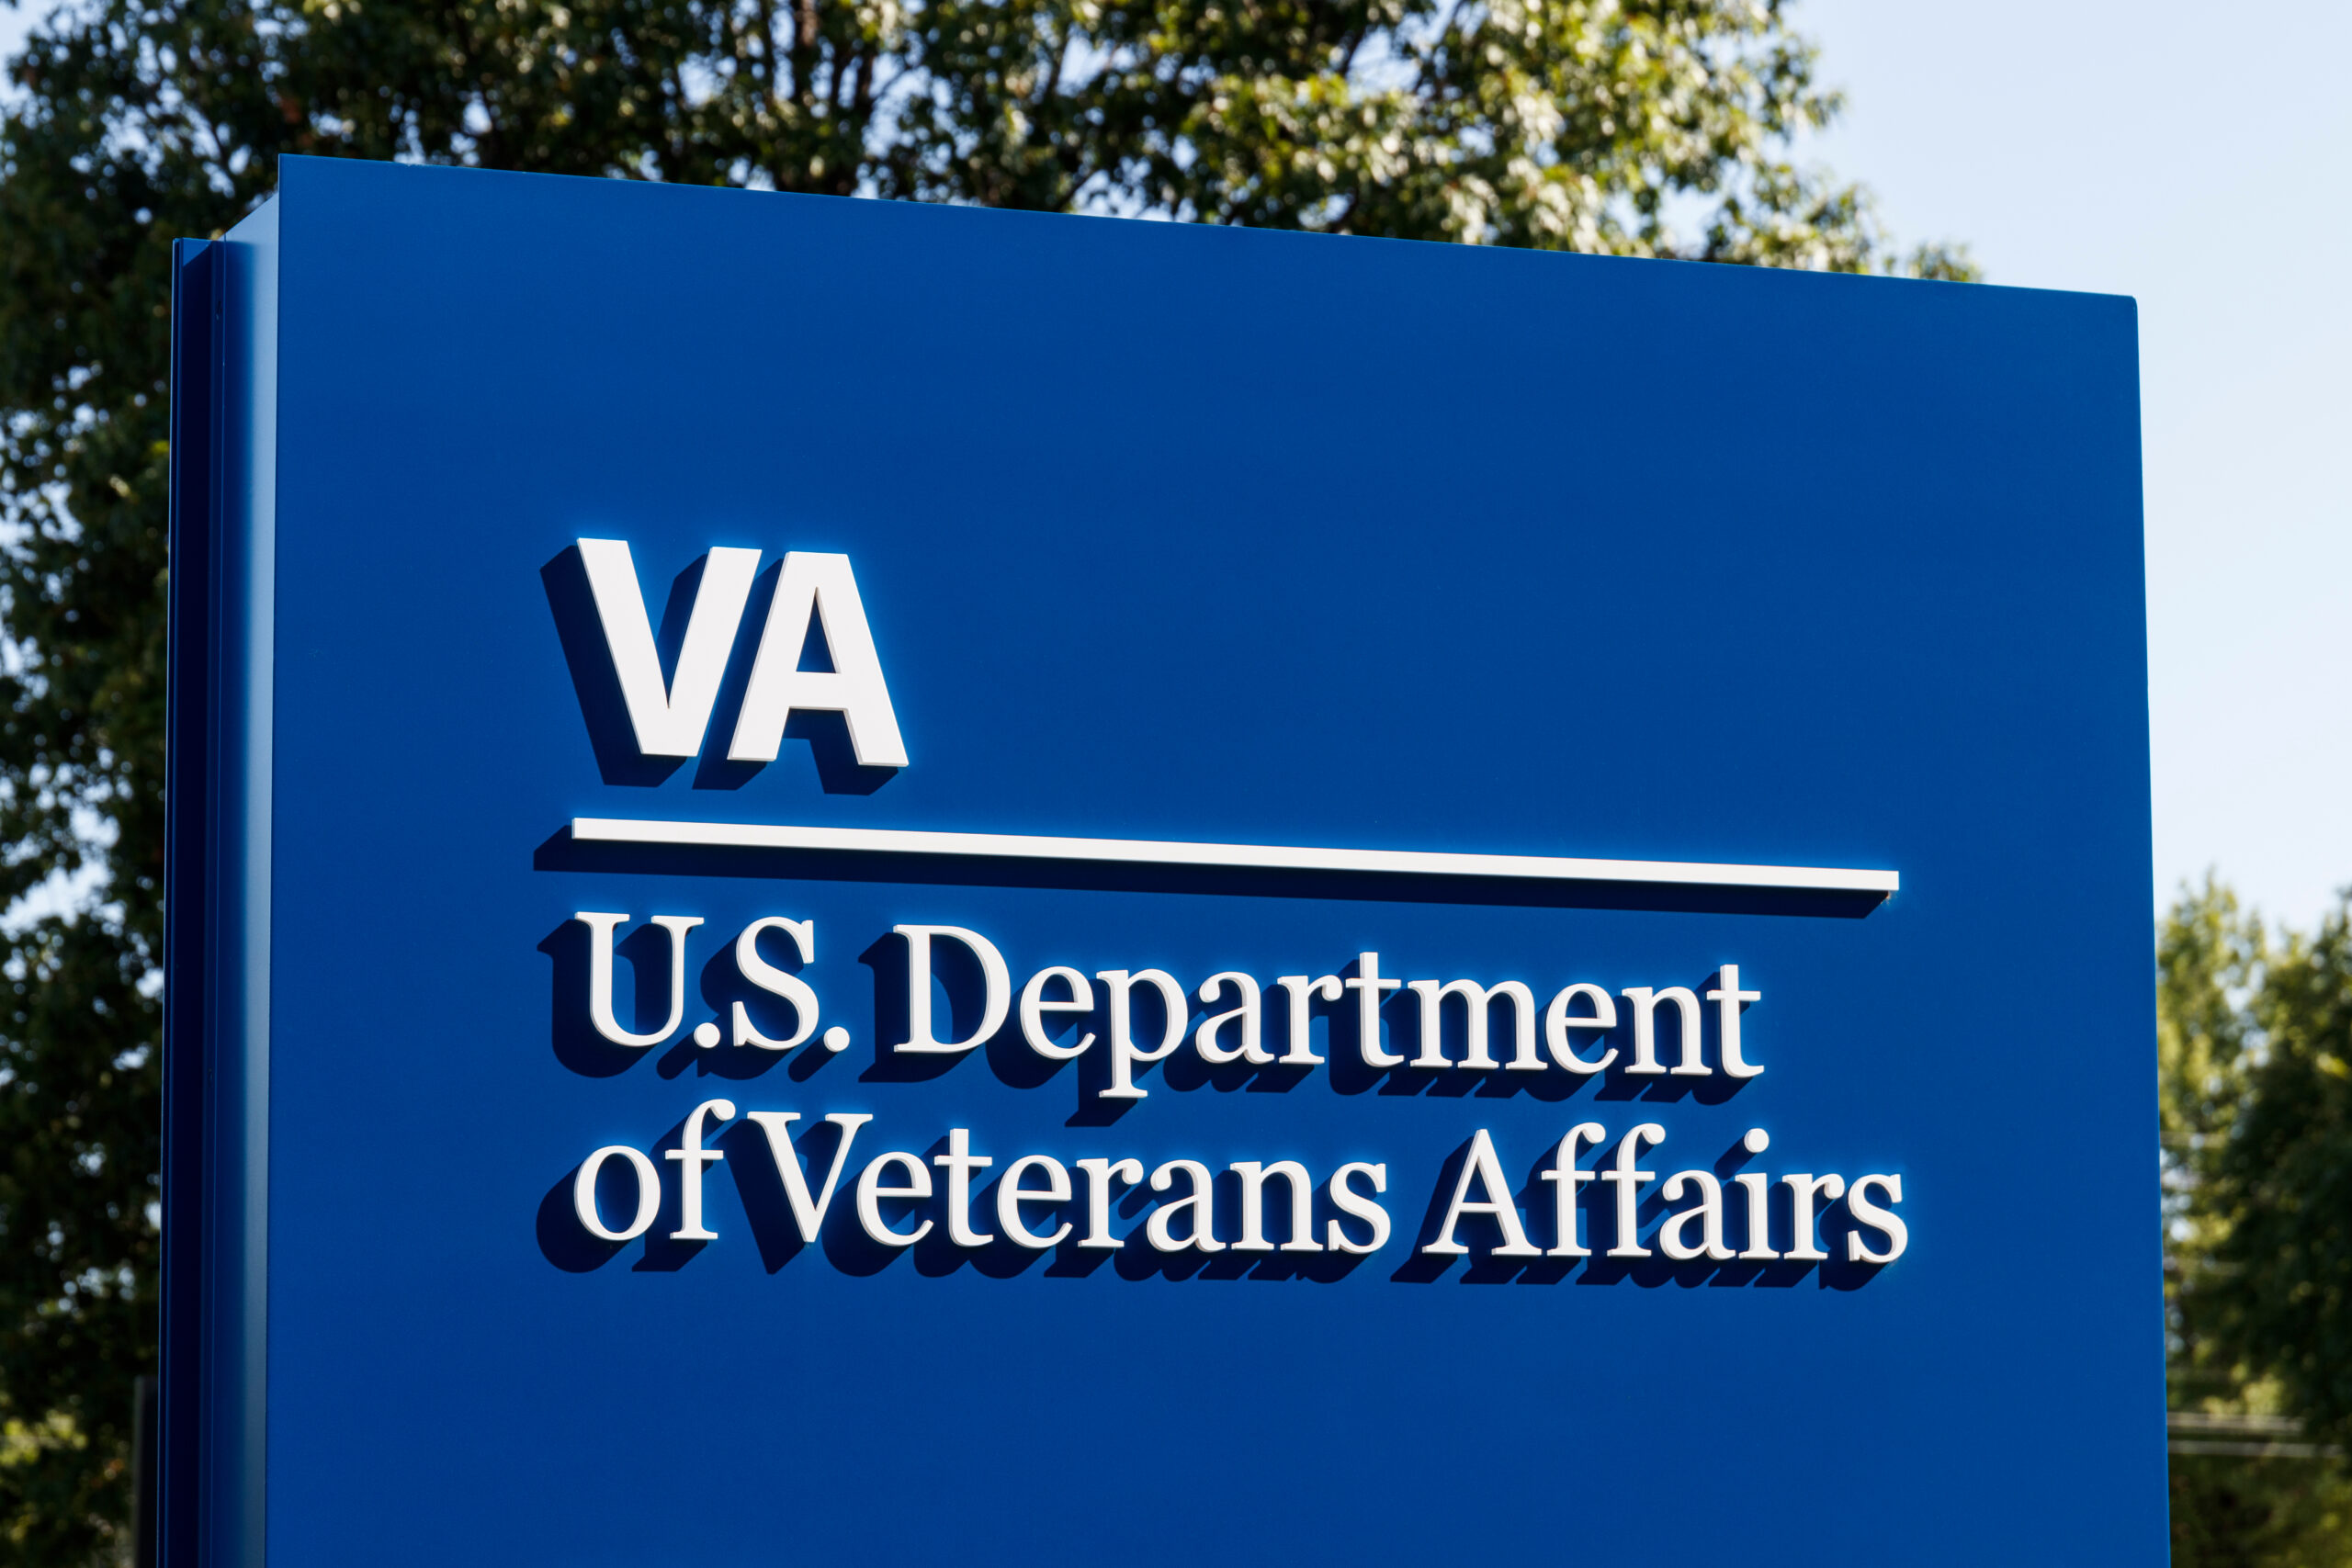 VA announces they will provide some abortion procedures, depending on circumstances